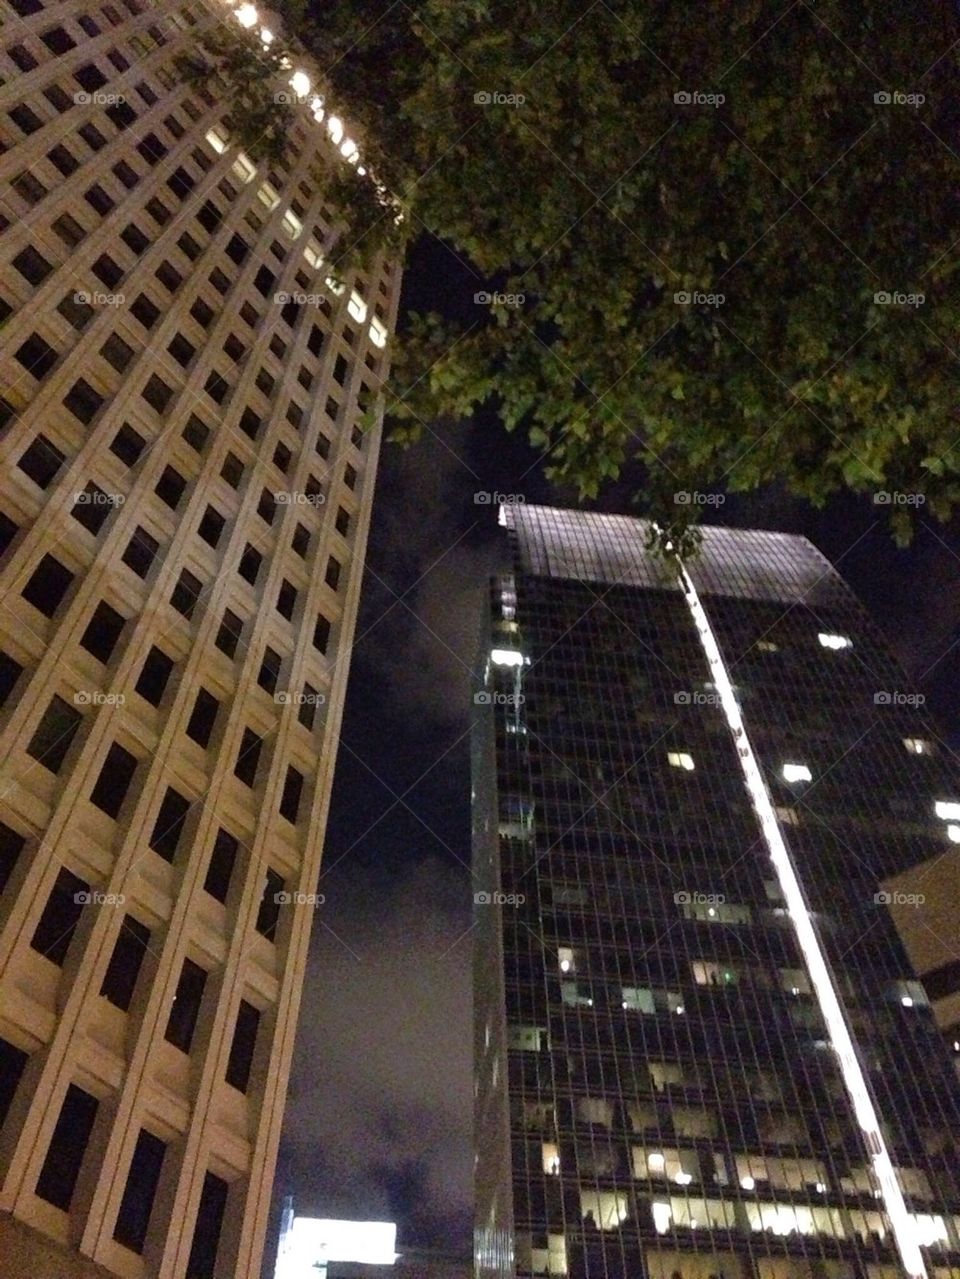 Sky scrapers at colony Square on a cloudy night in Midtown Atlanta Georgia